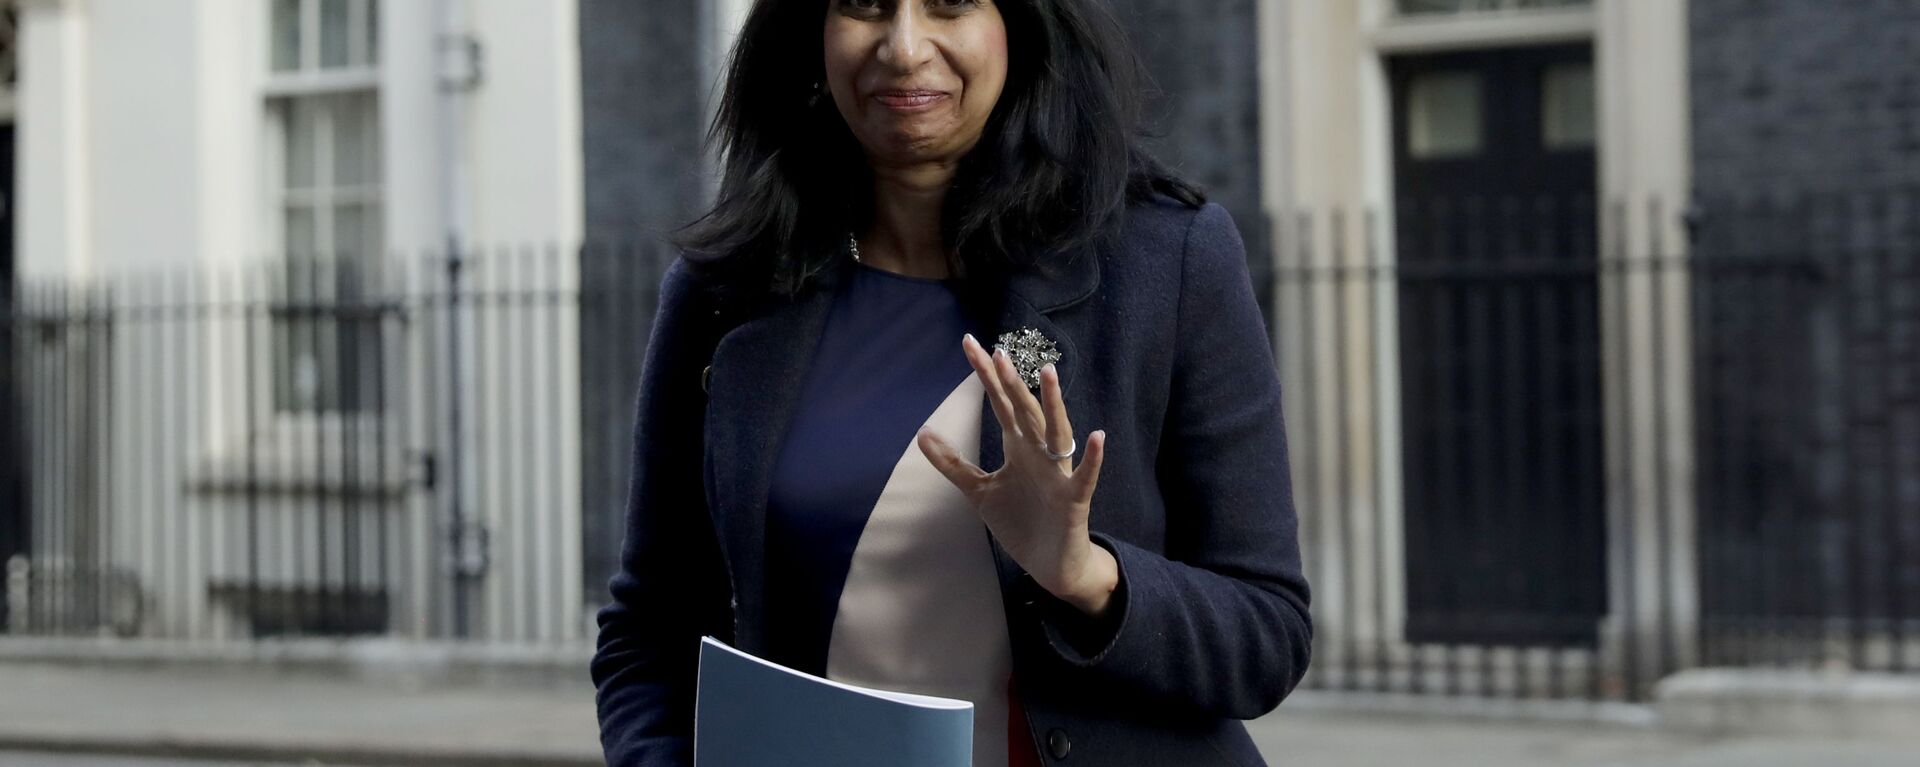 Suella Braverman the Attorney General for England and Wales, walks from Downing Street to attend a cabinet meeting at the Foreign and Commonwealth Office in London, Tuesday, Sept. 22, 2020 - Sputnik International, 1920, 19.10.2022